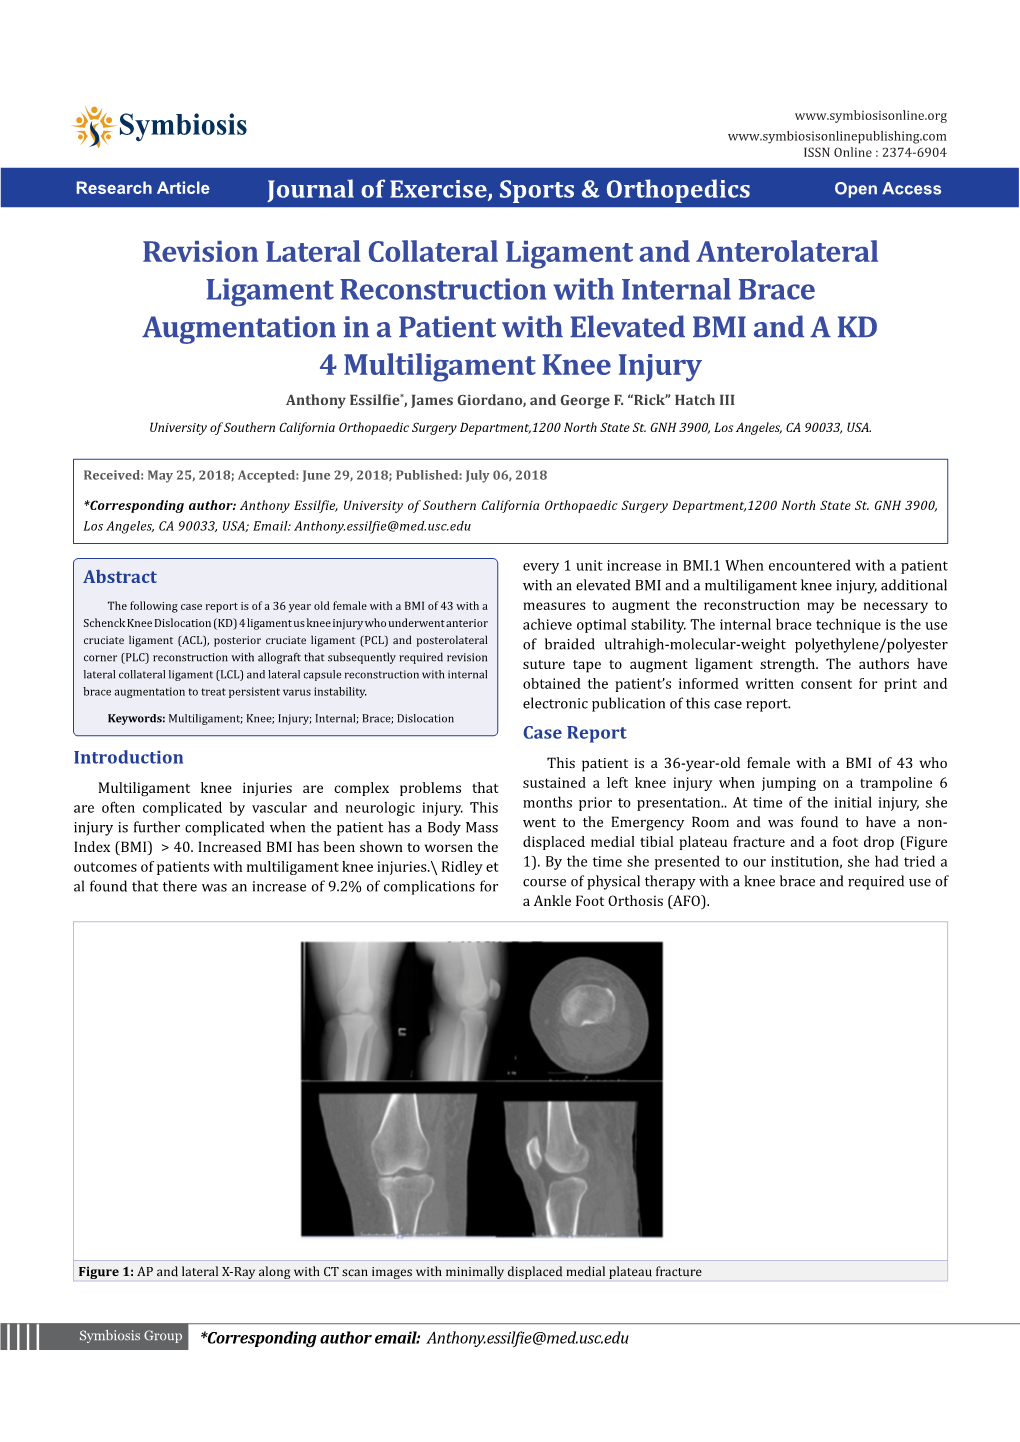 Revision Lateral Collateral Ligament and Anterolateral Ligament